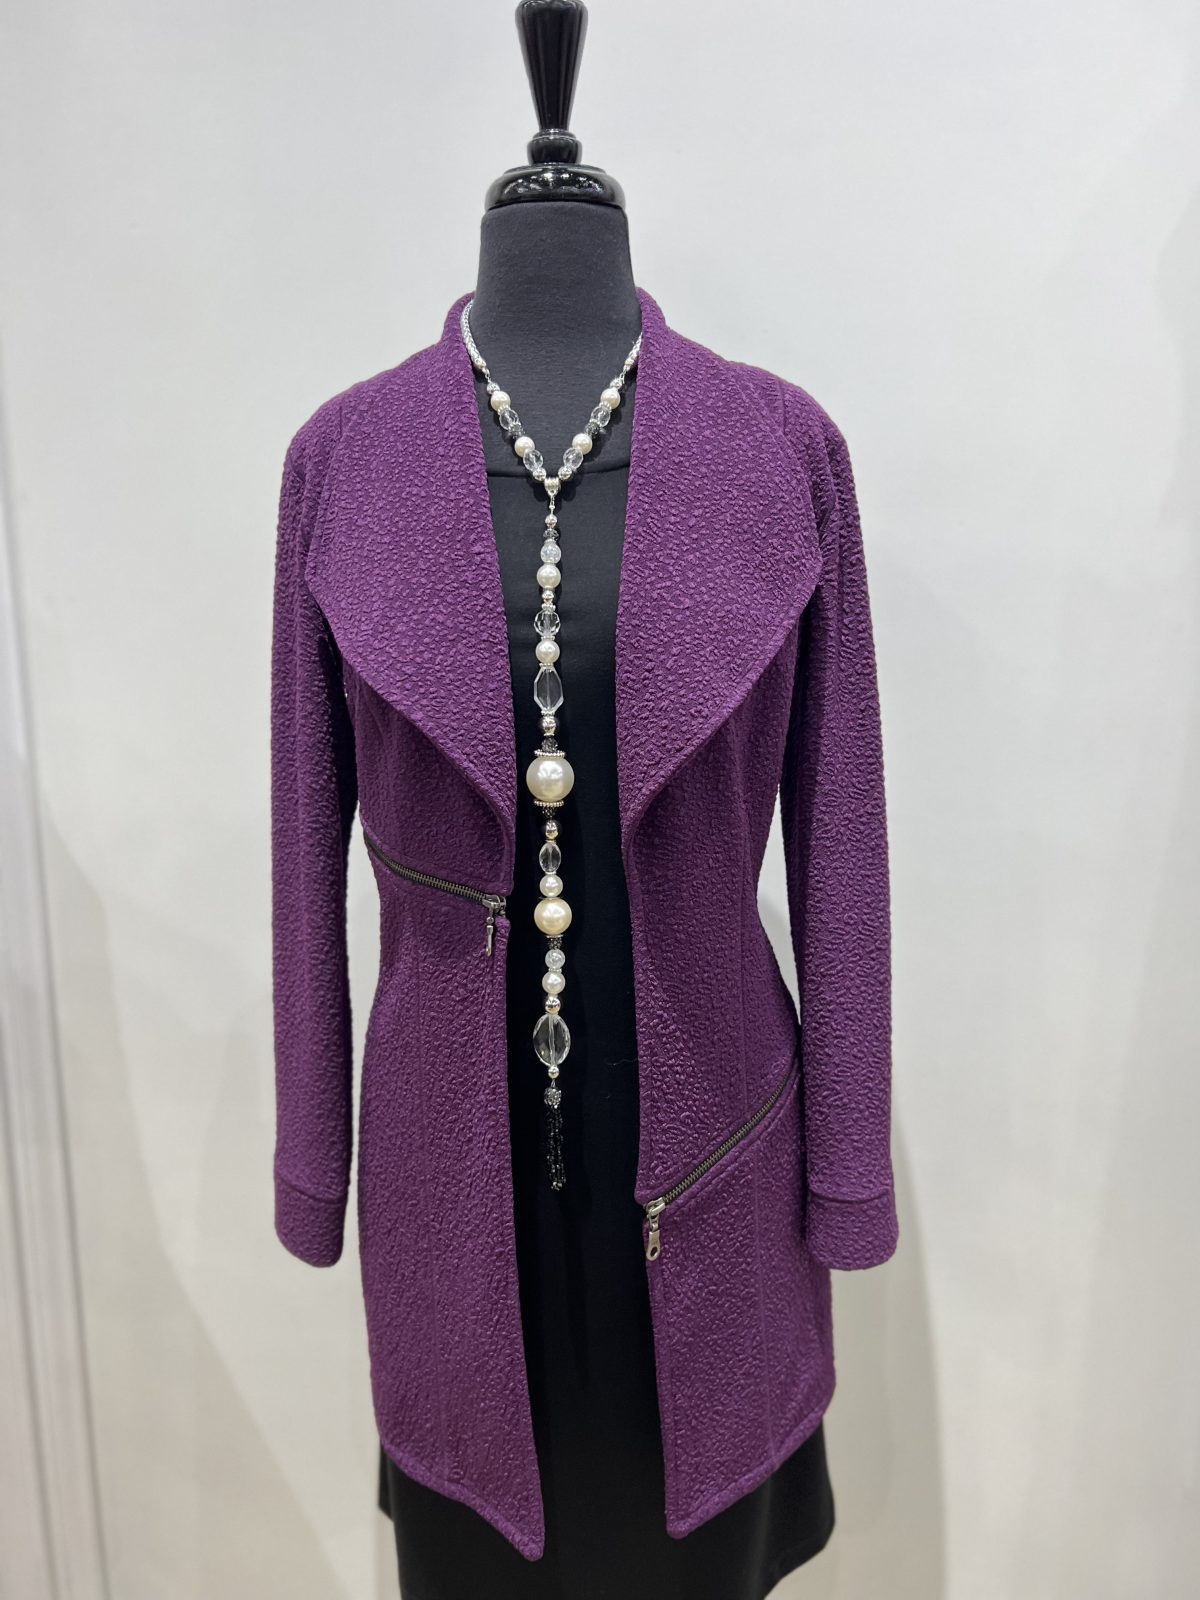 Eva Varro J12901 Deep Purple Long Barcelona Jacket with Zipper Detail | Ooh Ooh Shoes women's clothing and shoe boutique located in Naples